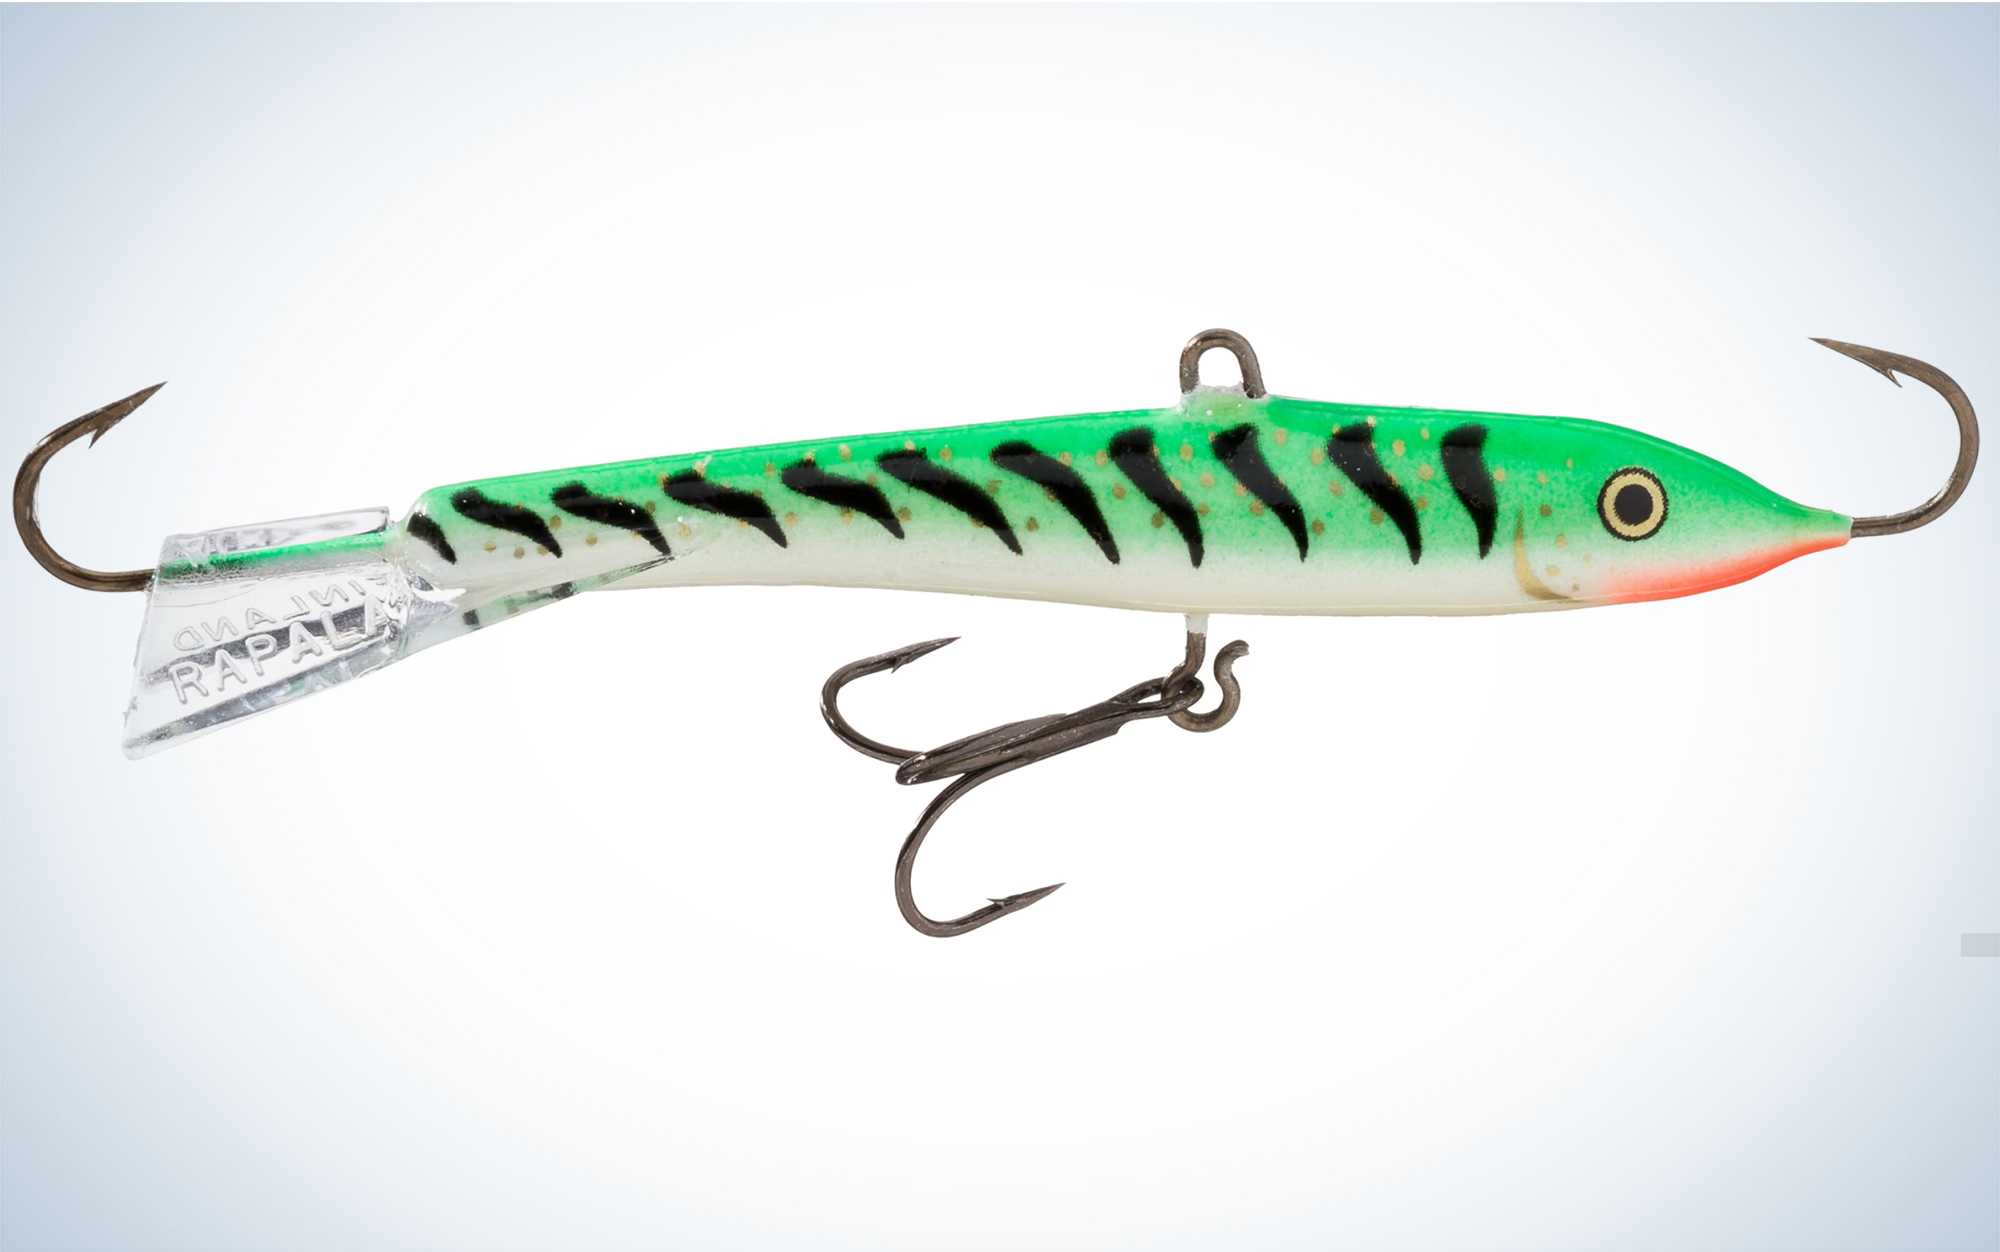 The Jigging Rap may be the best ice-fishing lure of all-time